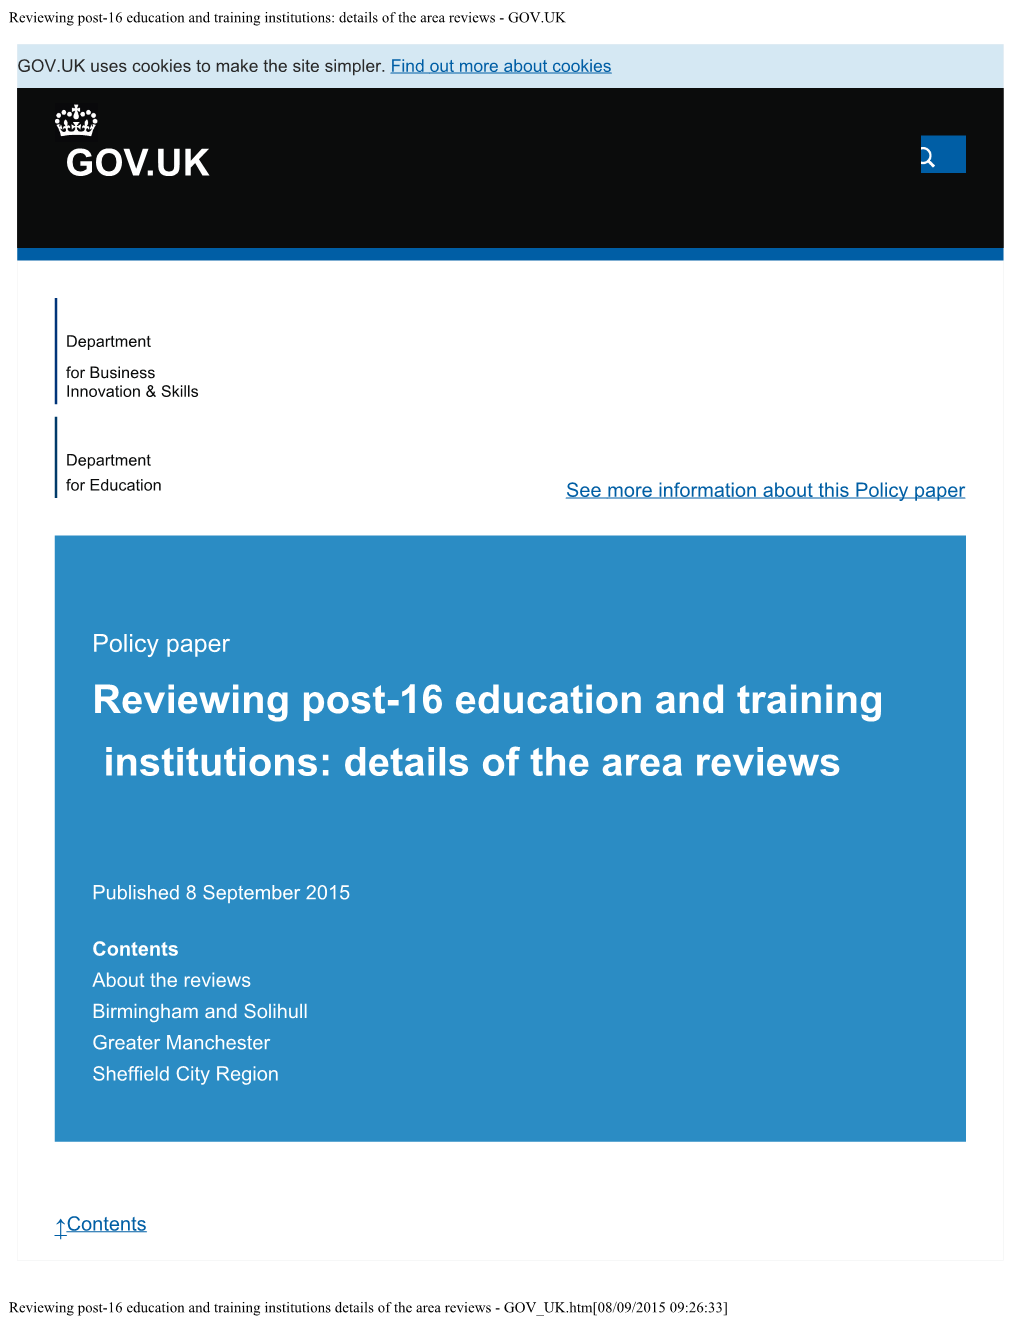 Reviewing Post-16 Education and Training Institutions: Details of the Area Reviews - GOV.UK